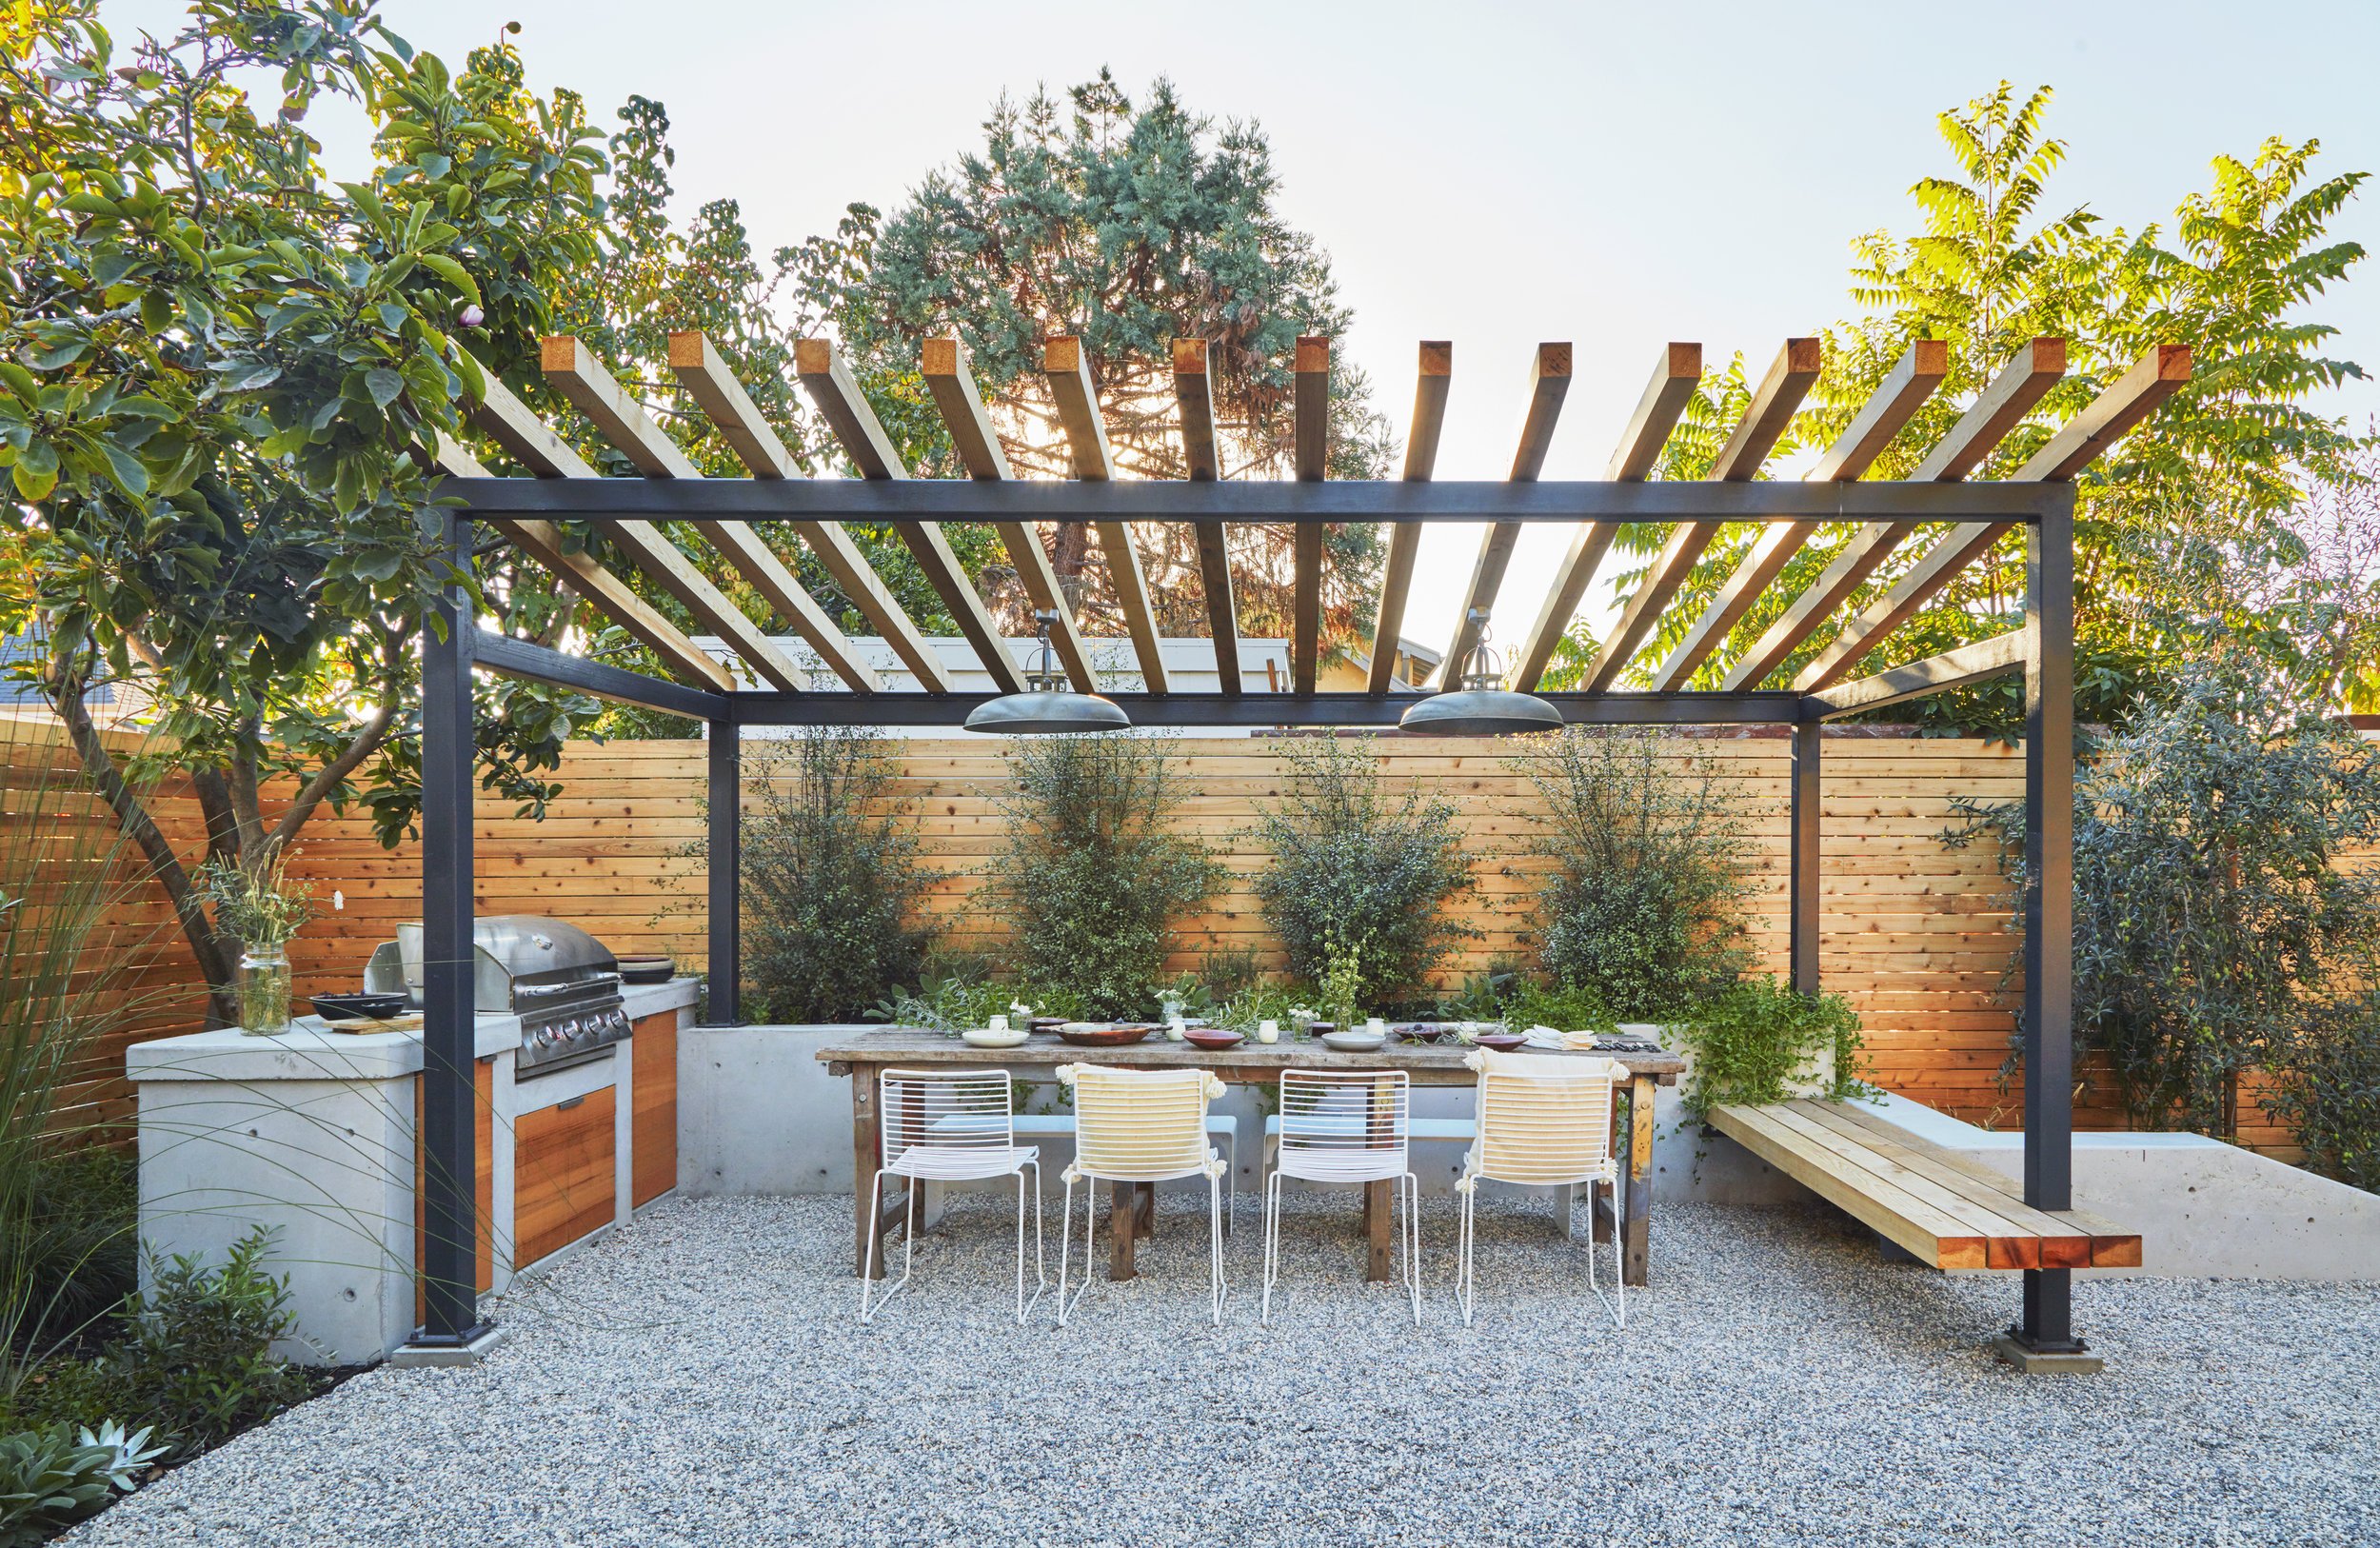 Backyard design with metal pergola, bbq, and outdoor dining area